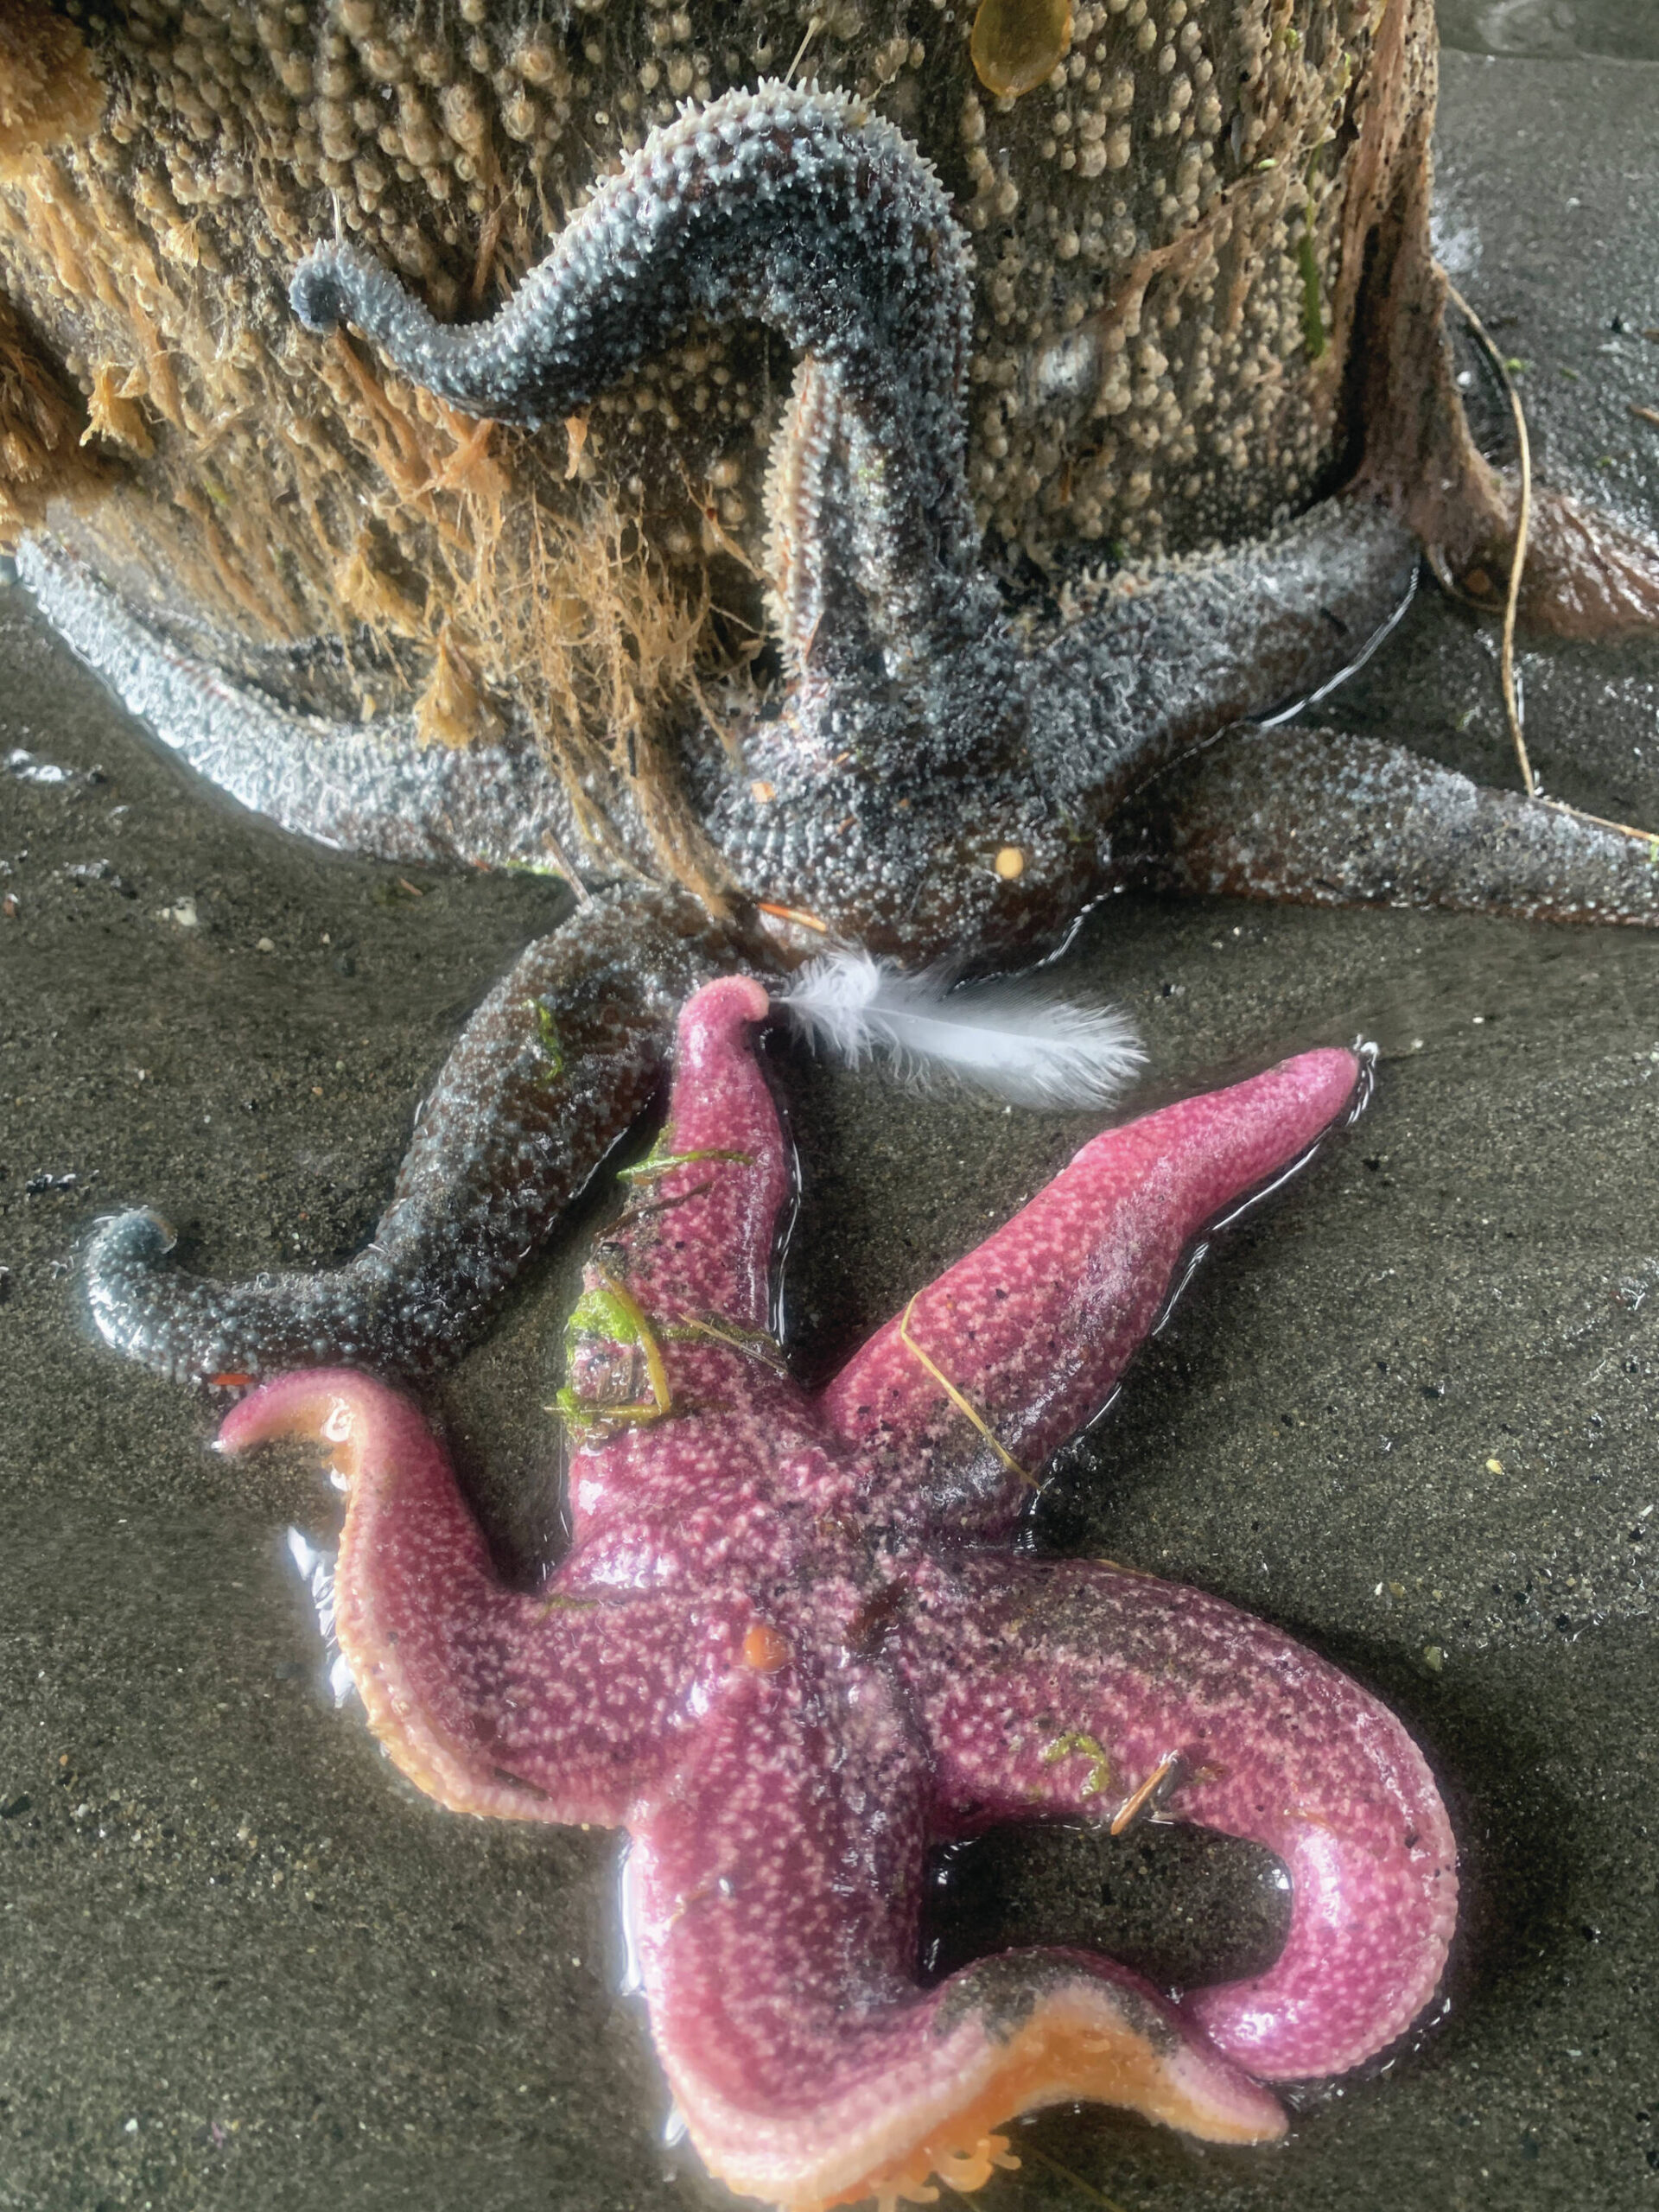 A pair of seastars at high tide along the Land’s End beach, June 7.